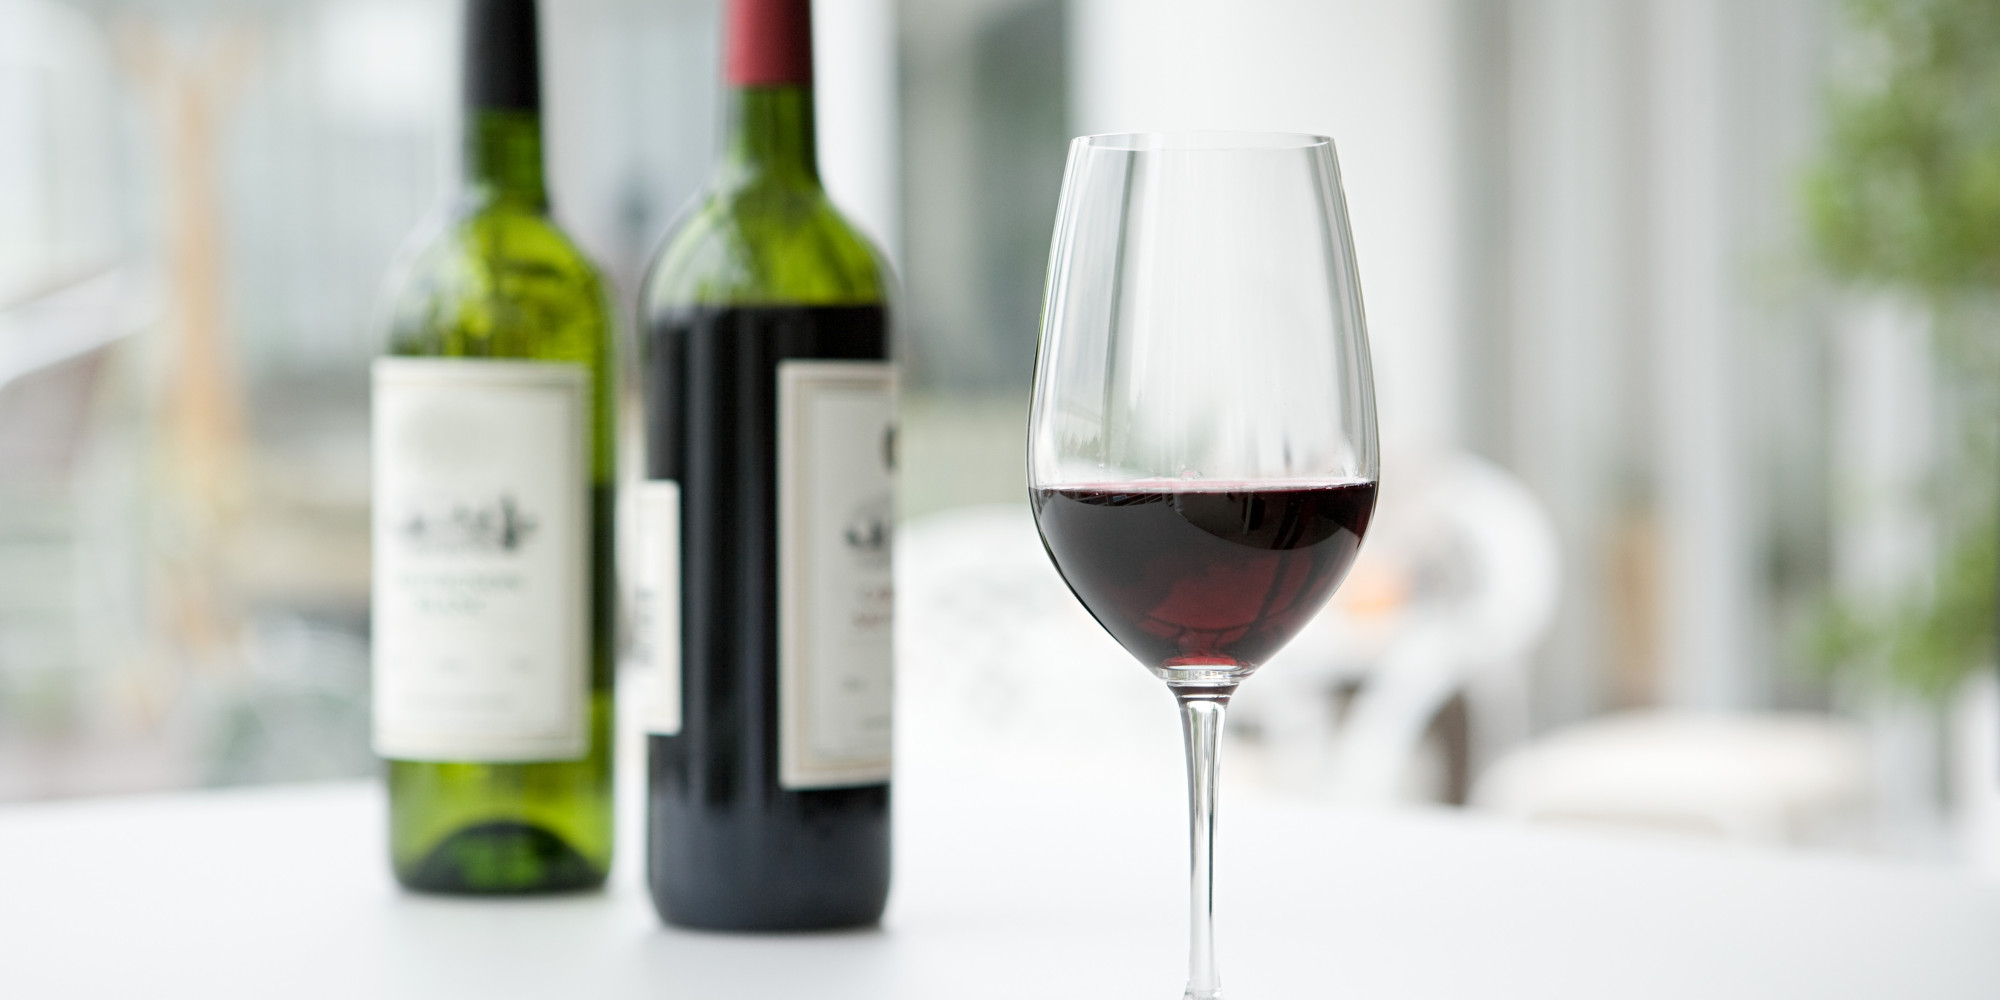 5 Strange New Ways to Use Red Wine | The Daily Meal